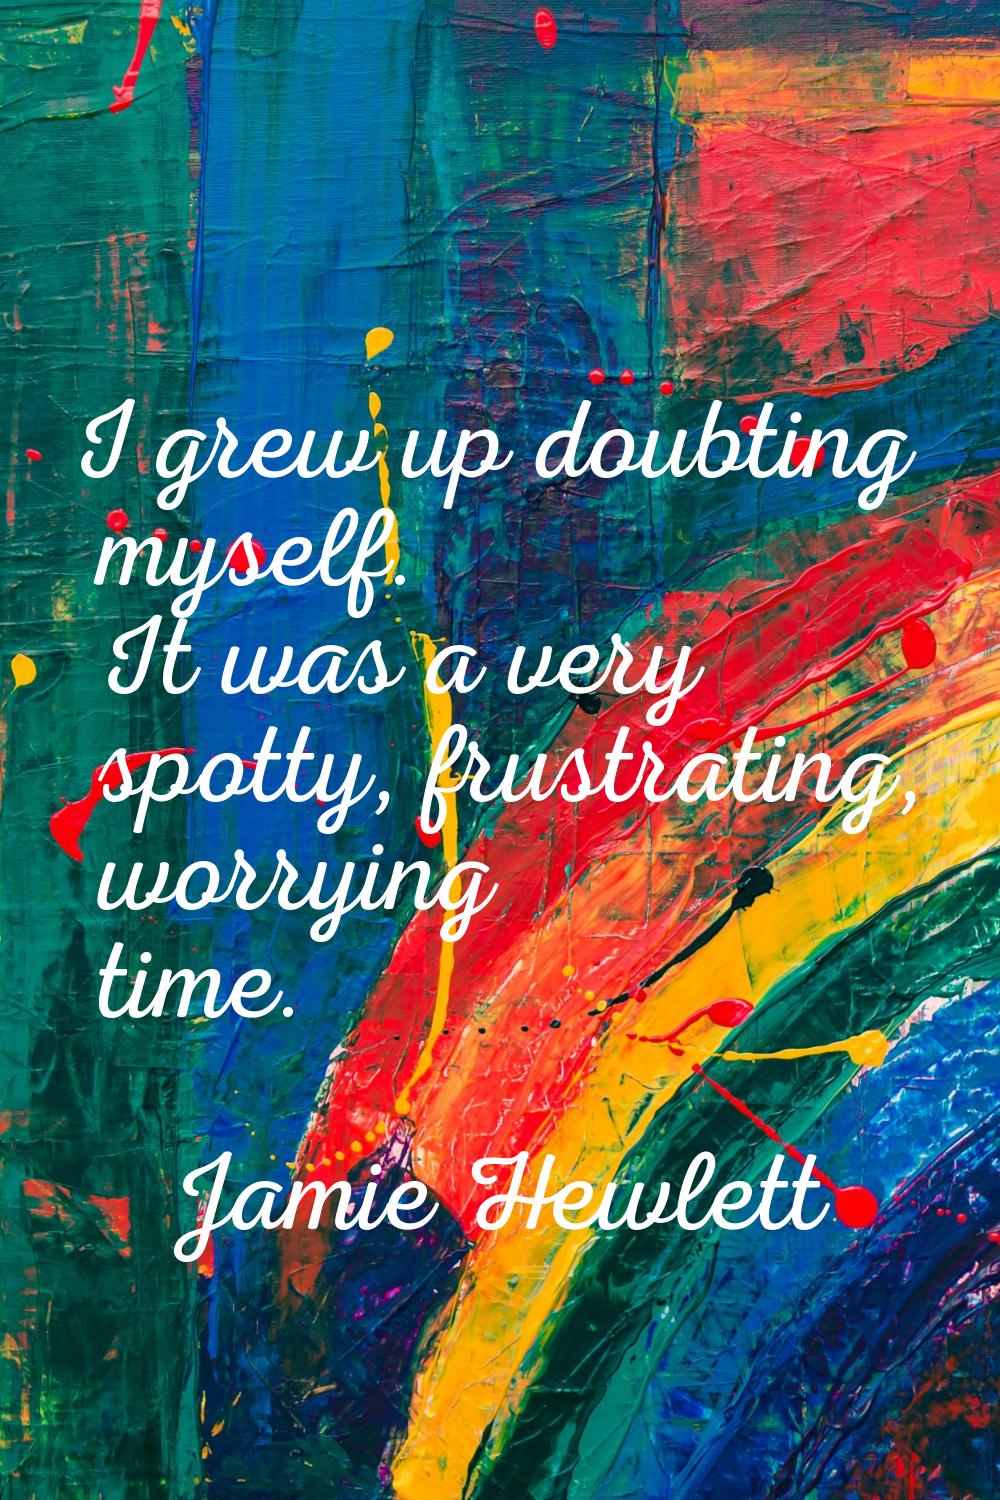 I grew up doubting myself. It was a very spotty, frustrating, worrying time.